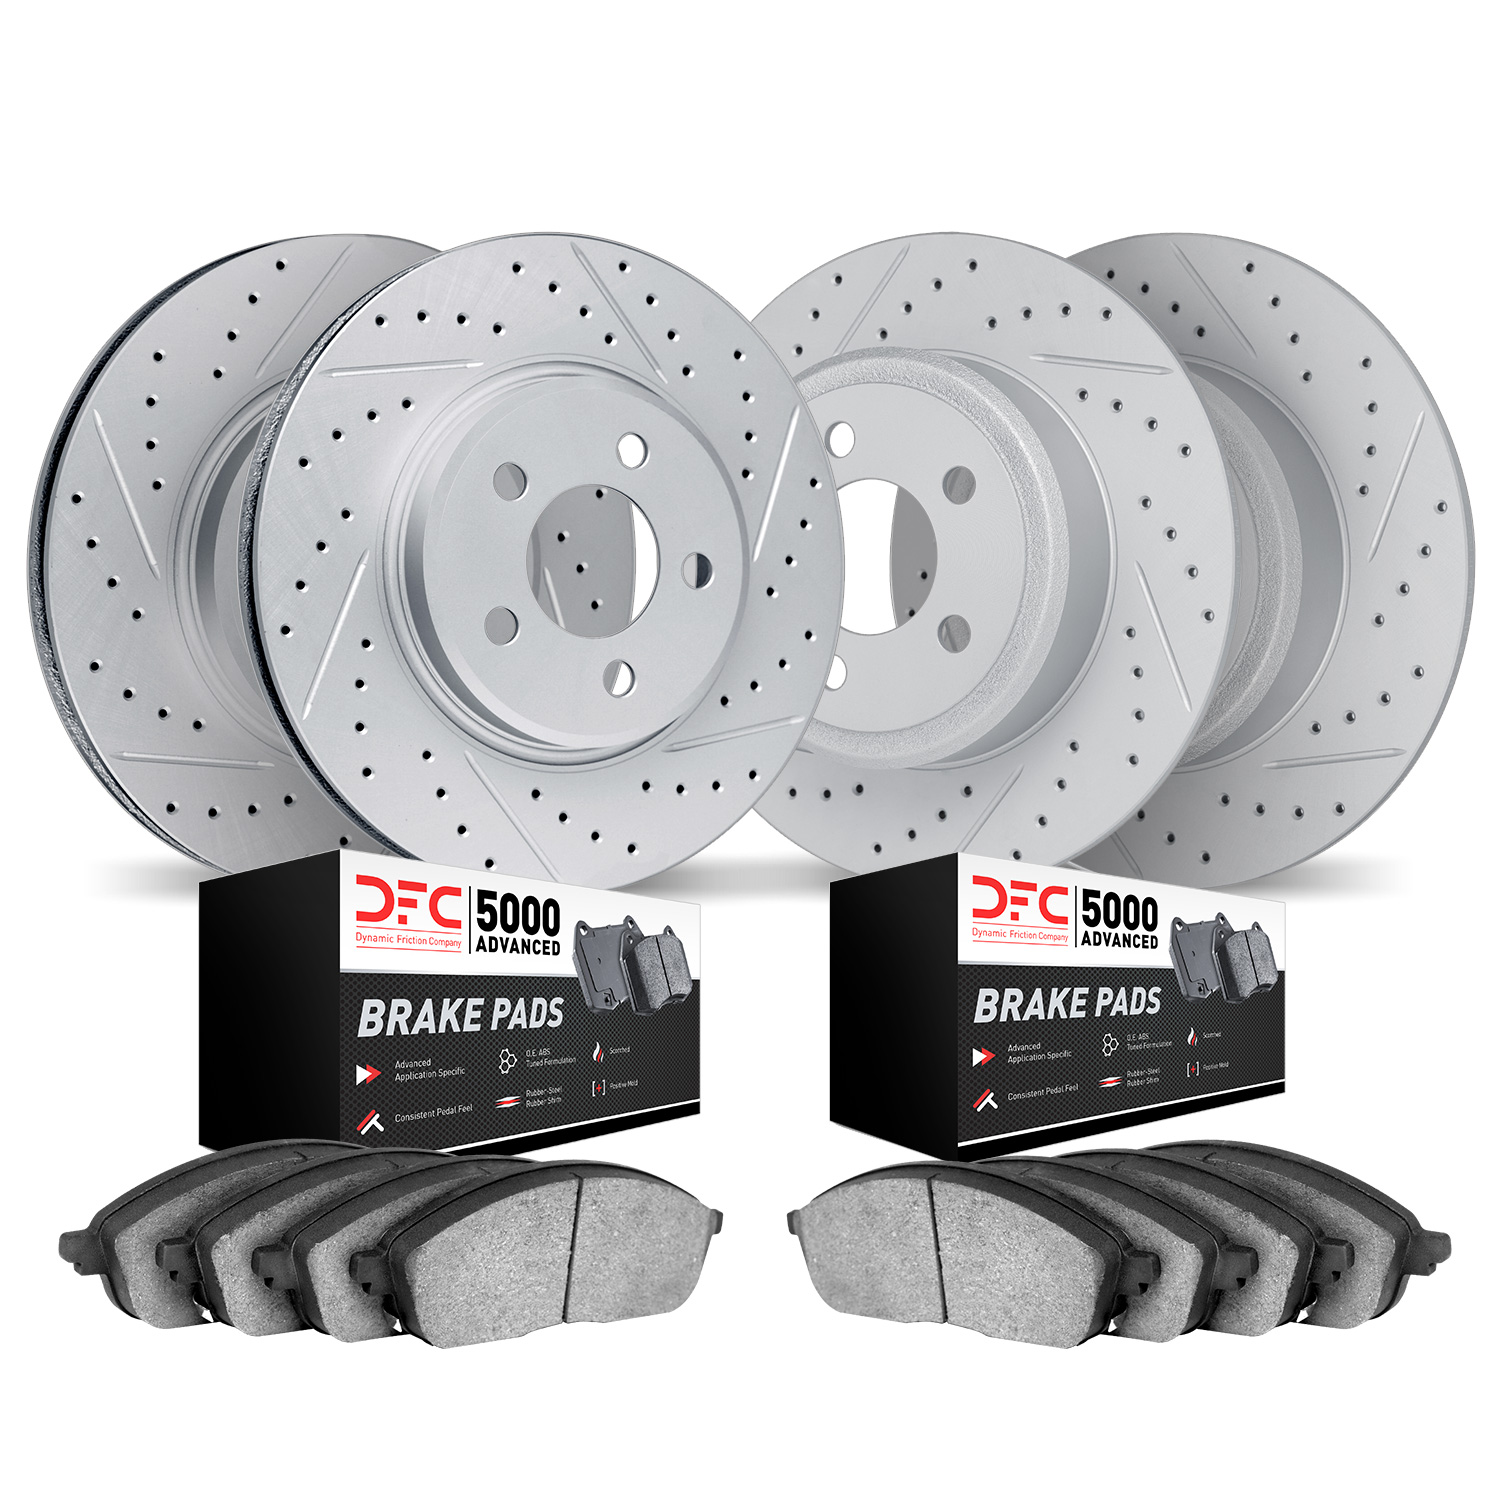 2504-74027 Geoperformance Drilled/Slotted Rotors w/5000 Advanced Brake Pads Kit, 2006-2010 Audi/Volkswagen, Position: Front and